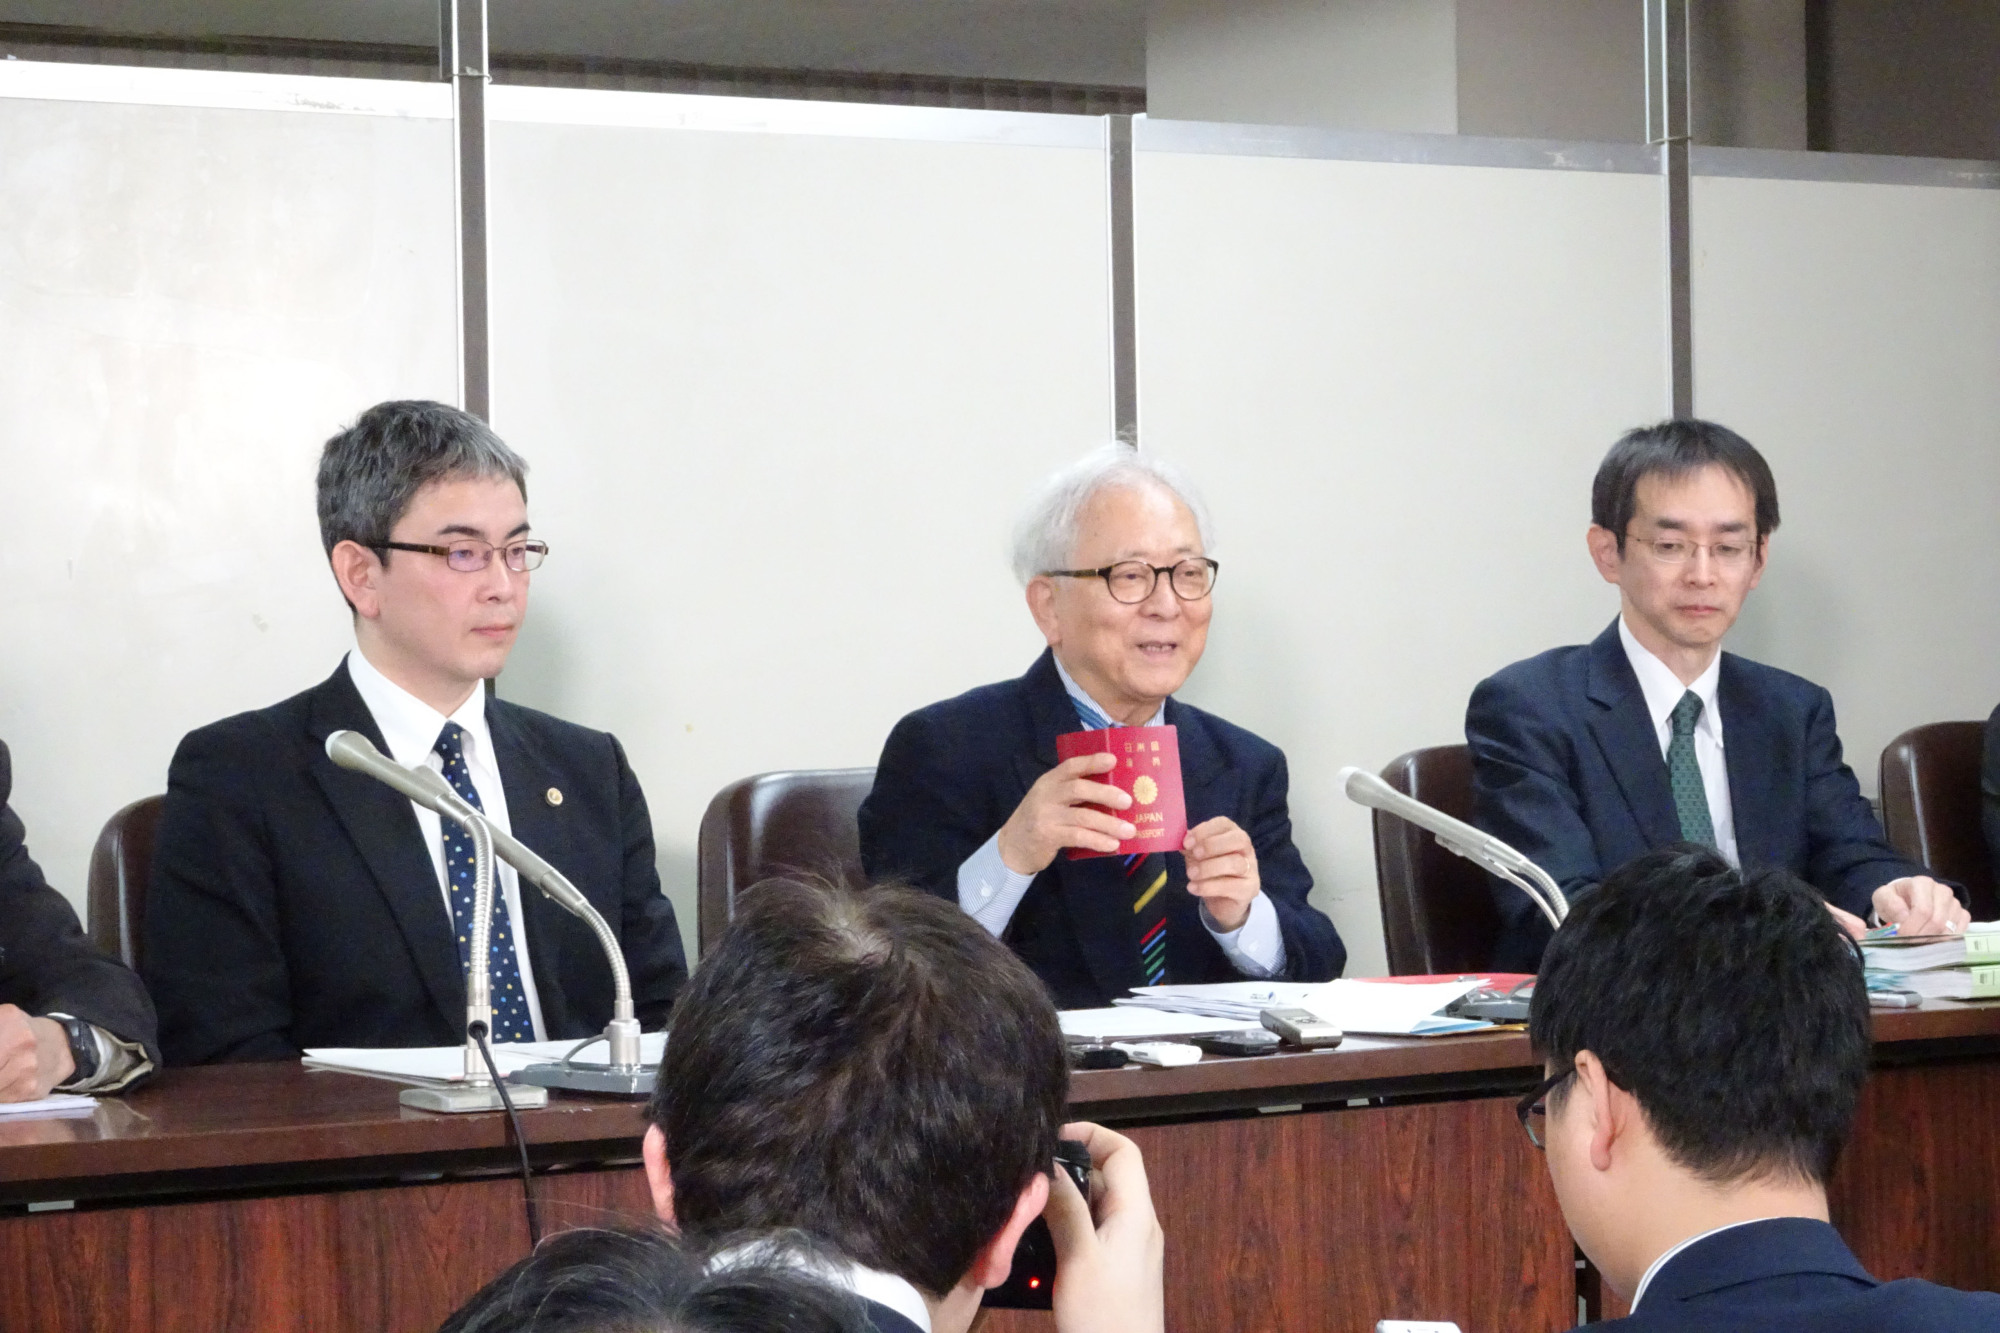 Hitoshi Nogawa, a plaintiff in a lawsuit targeting Japan's ban on dual citizenship, holds up his invalidated passport at a news conference in Tokyo on Monday, telling reporters that being forced to give up his nationality was a 'painful experience.' | SAKURA MURAKAMI